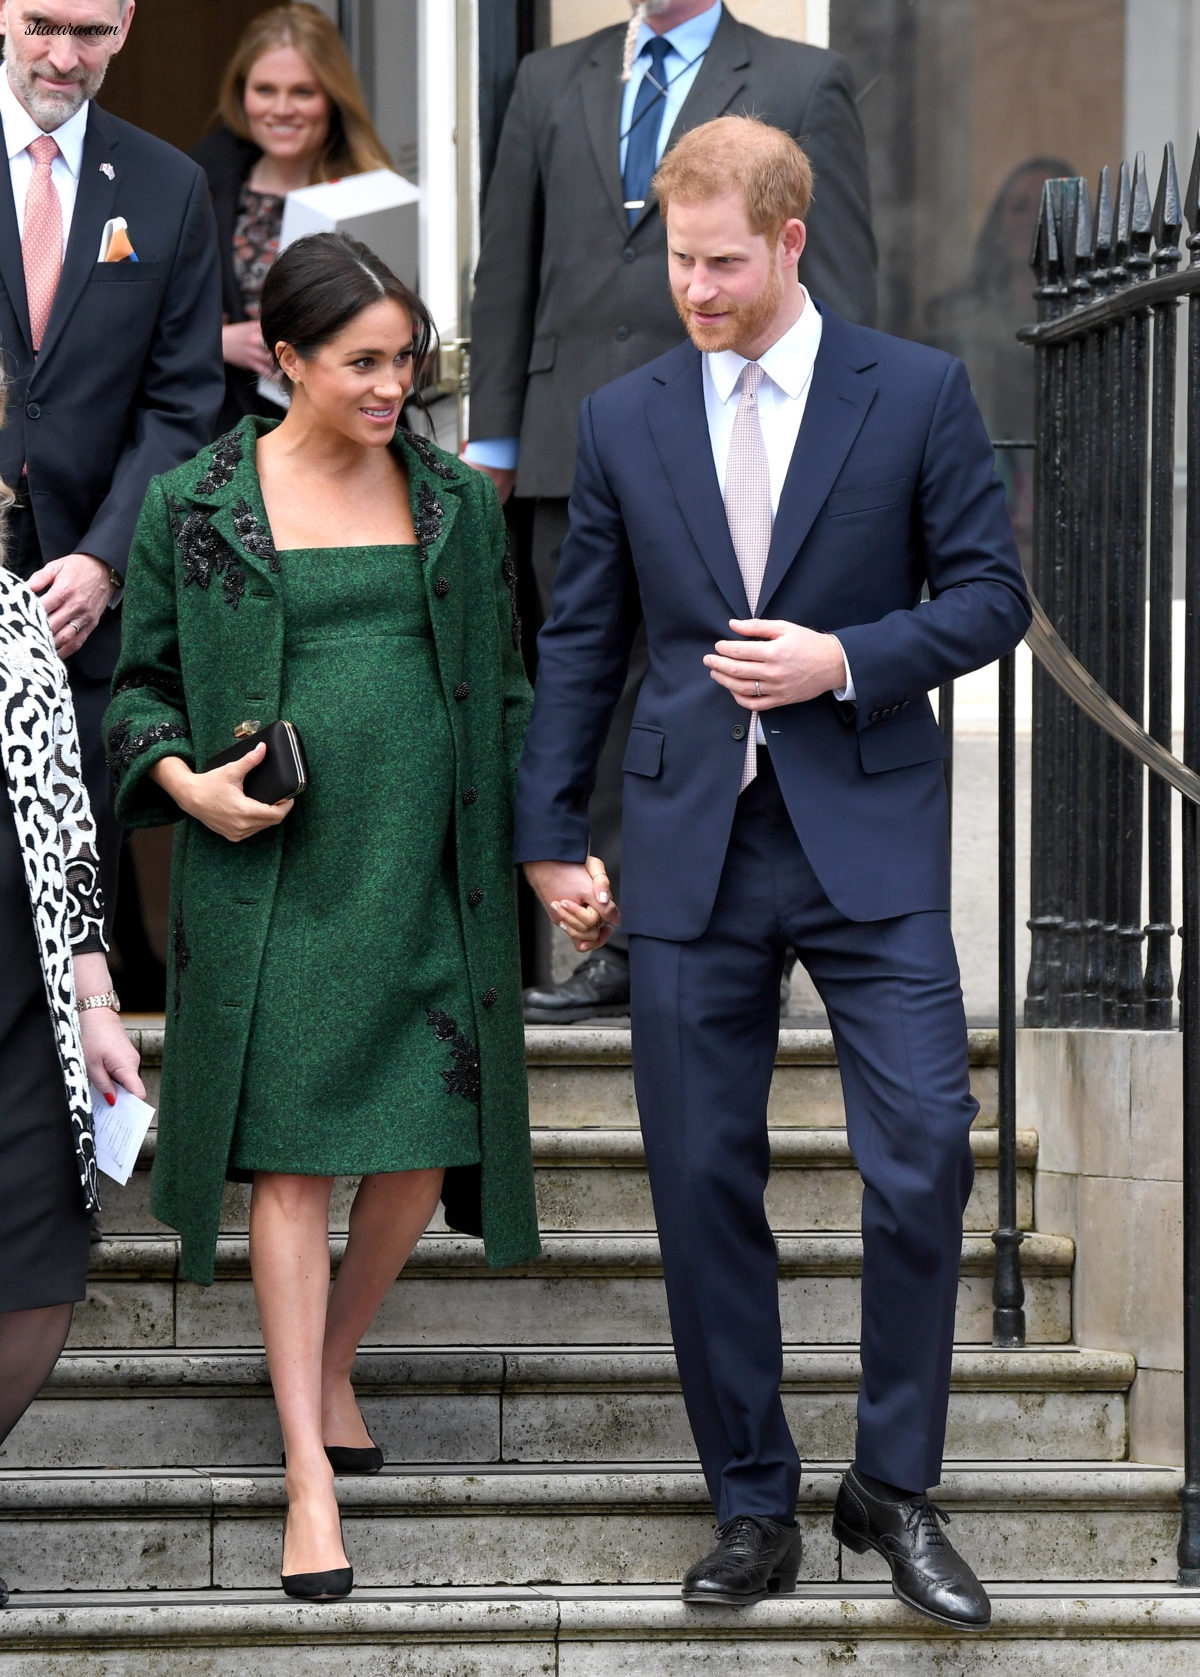 We Can't Get Enough Of Meghan Markle's Adorable Bump And Pregnancy Style